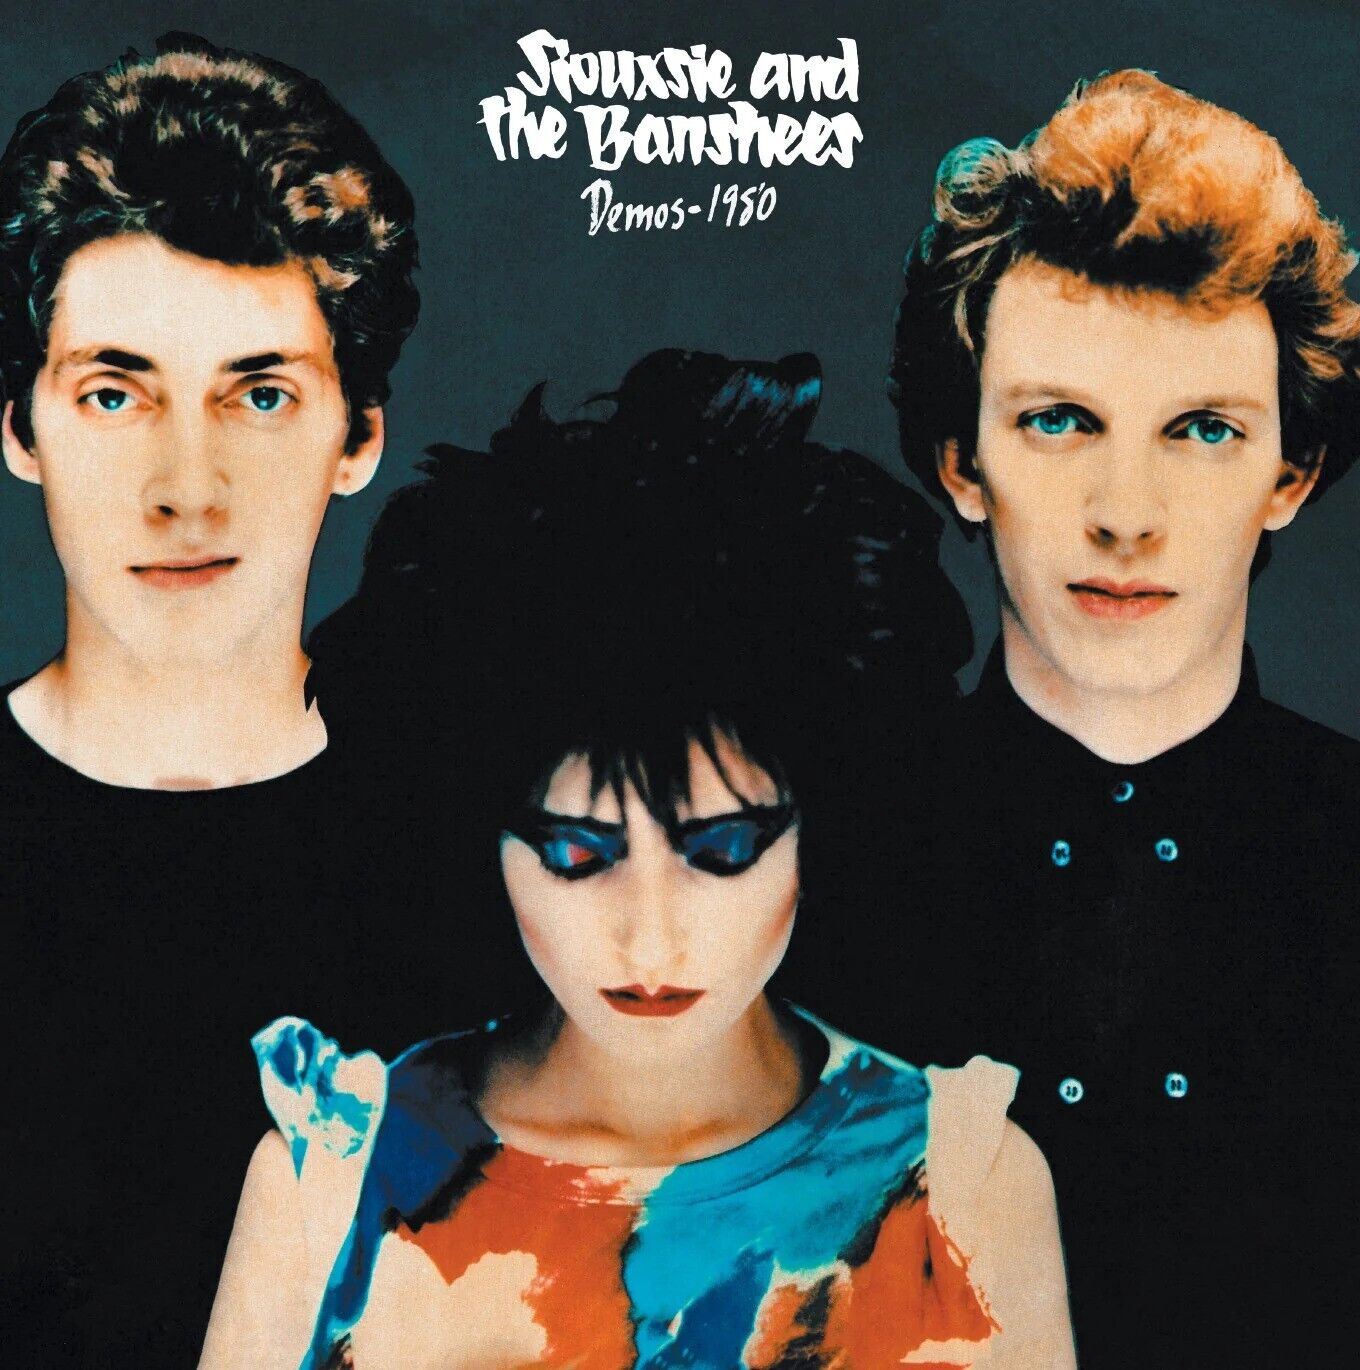 SIOUXSIE AND THE BANSHEES - Polydor and Warner Chappell Demos